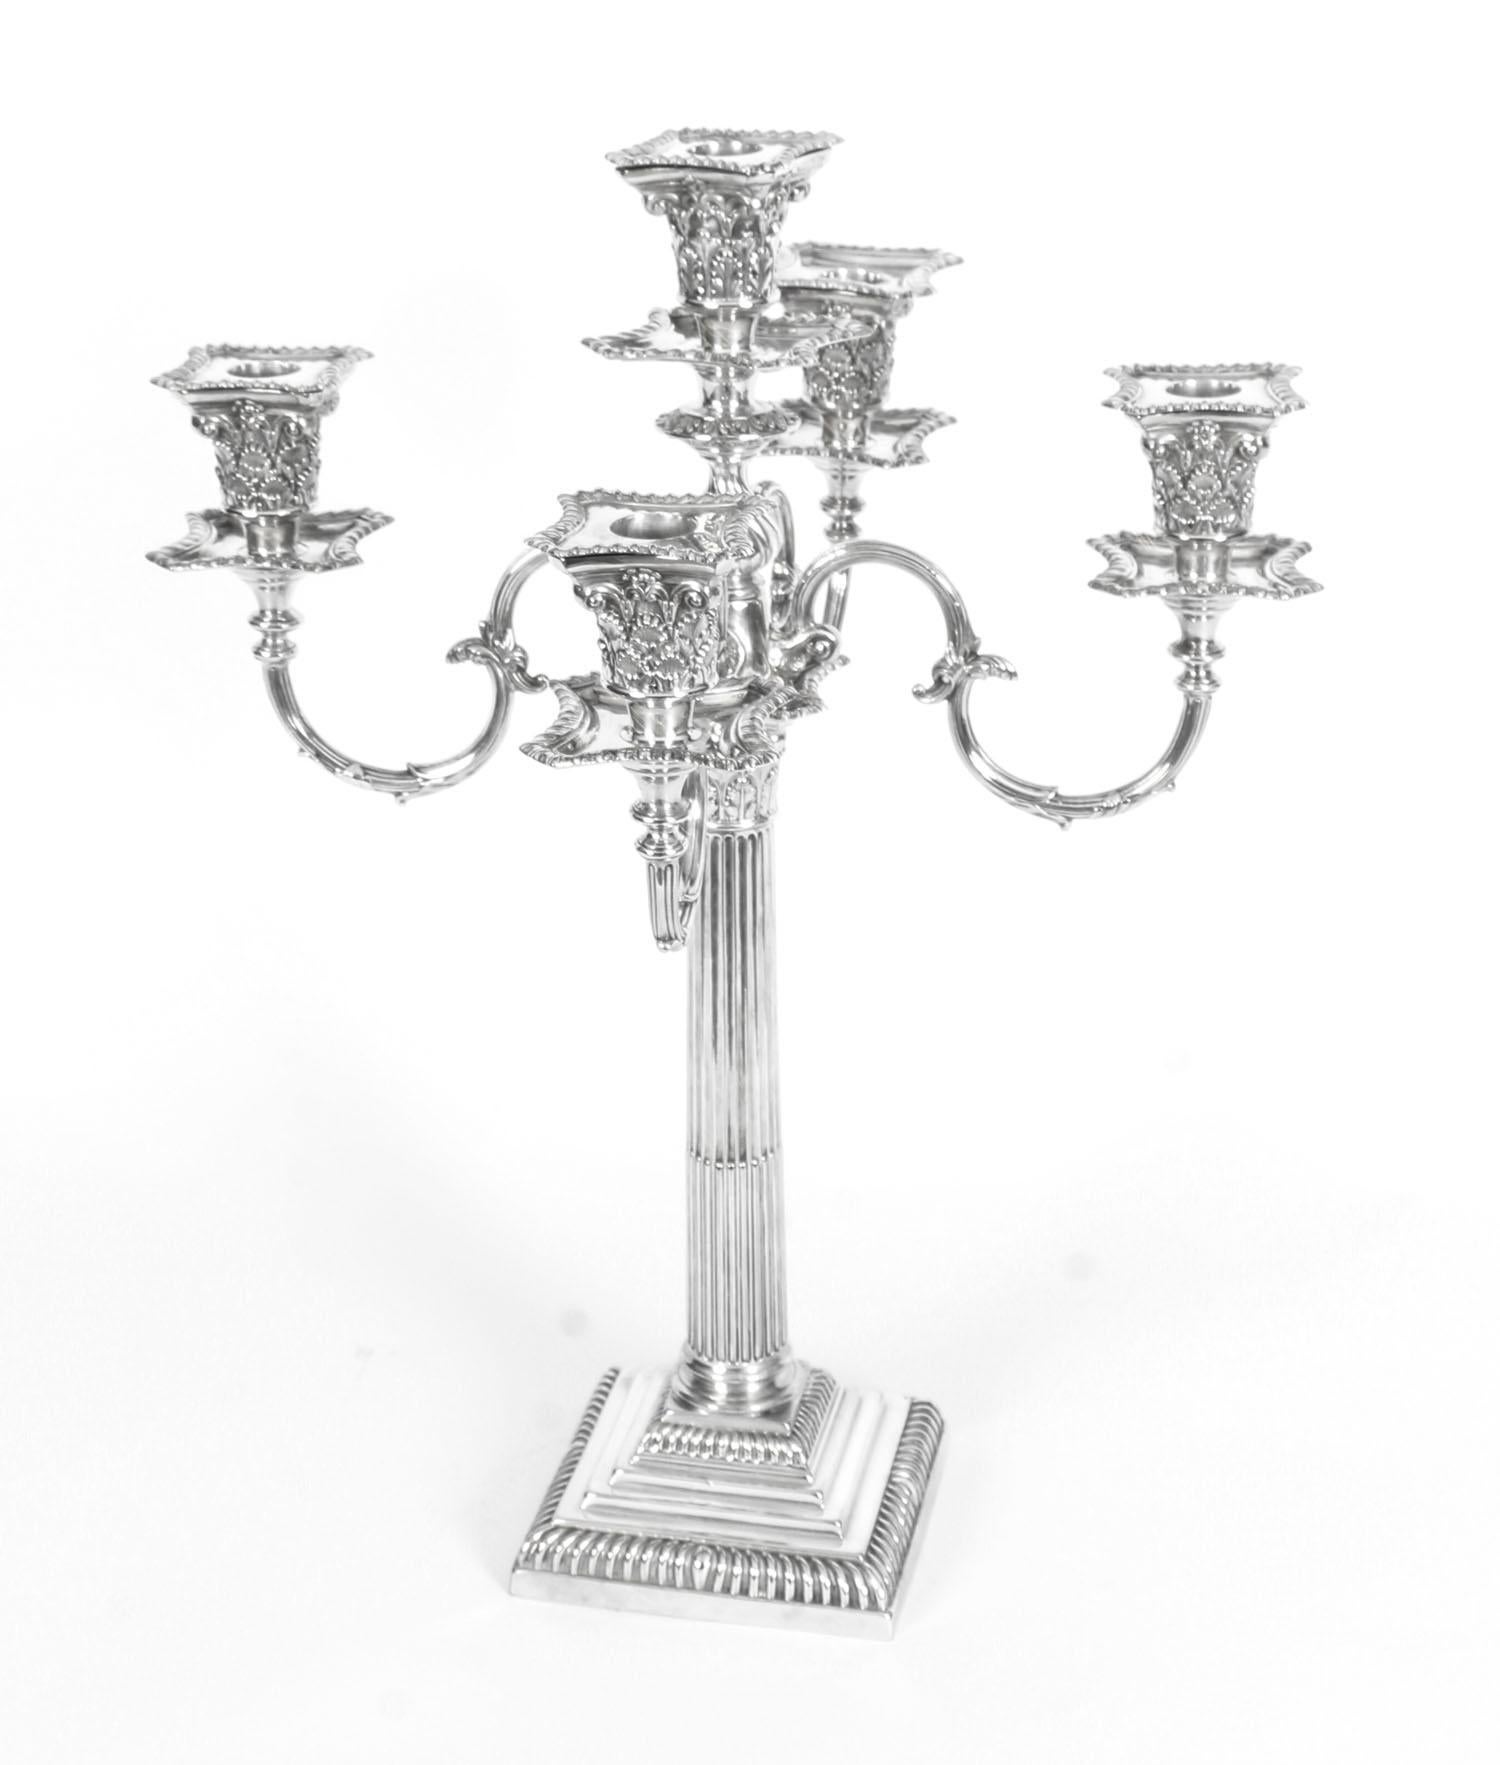 Victorian Antique Pair of Five-Light Candelabra by Mappin & Webb, 19th Century